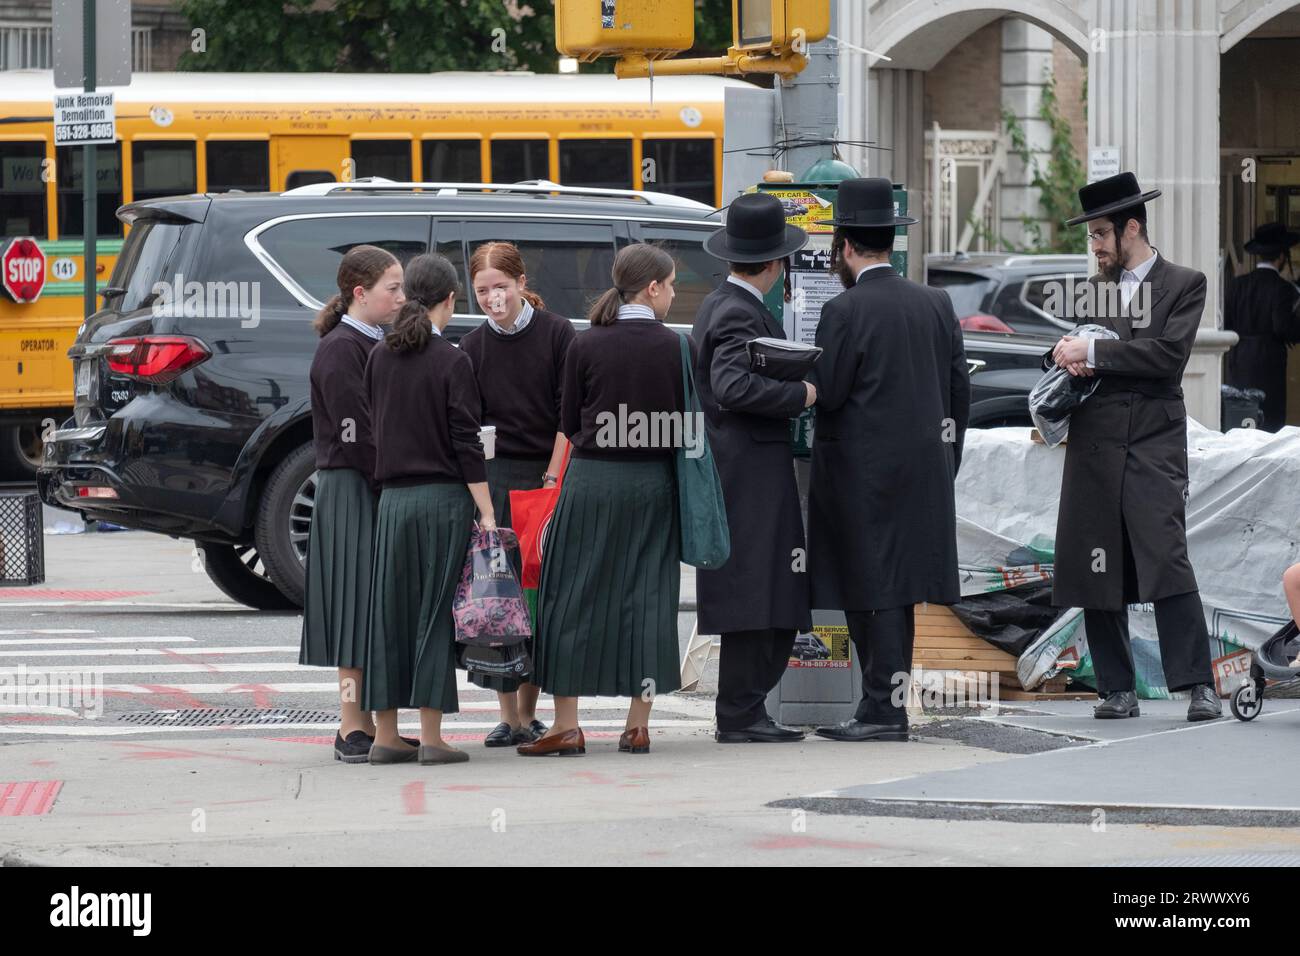 A street scene in the orthodox Jewish section of Williamsburg ,Brooklyn with girls waiting for a school bus and men reading posted signs. Stock Photo